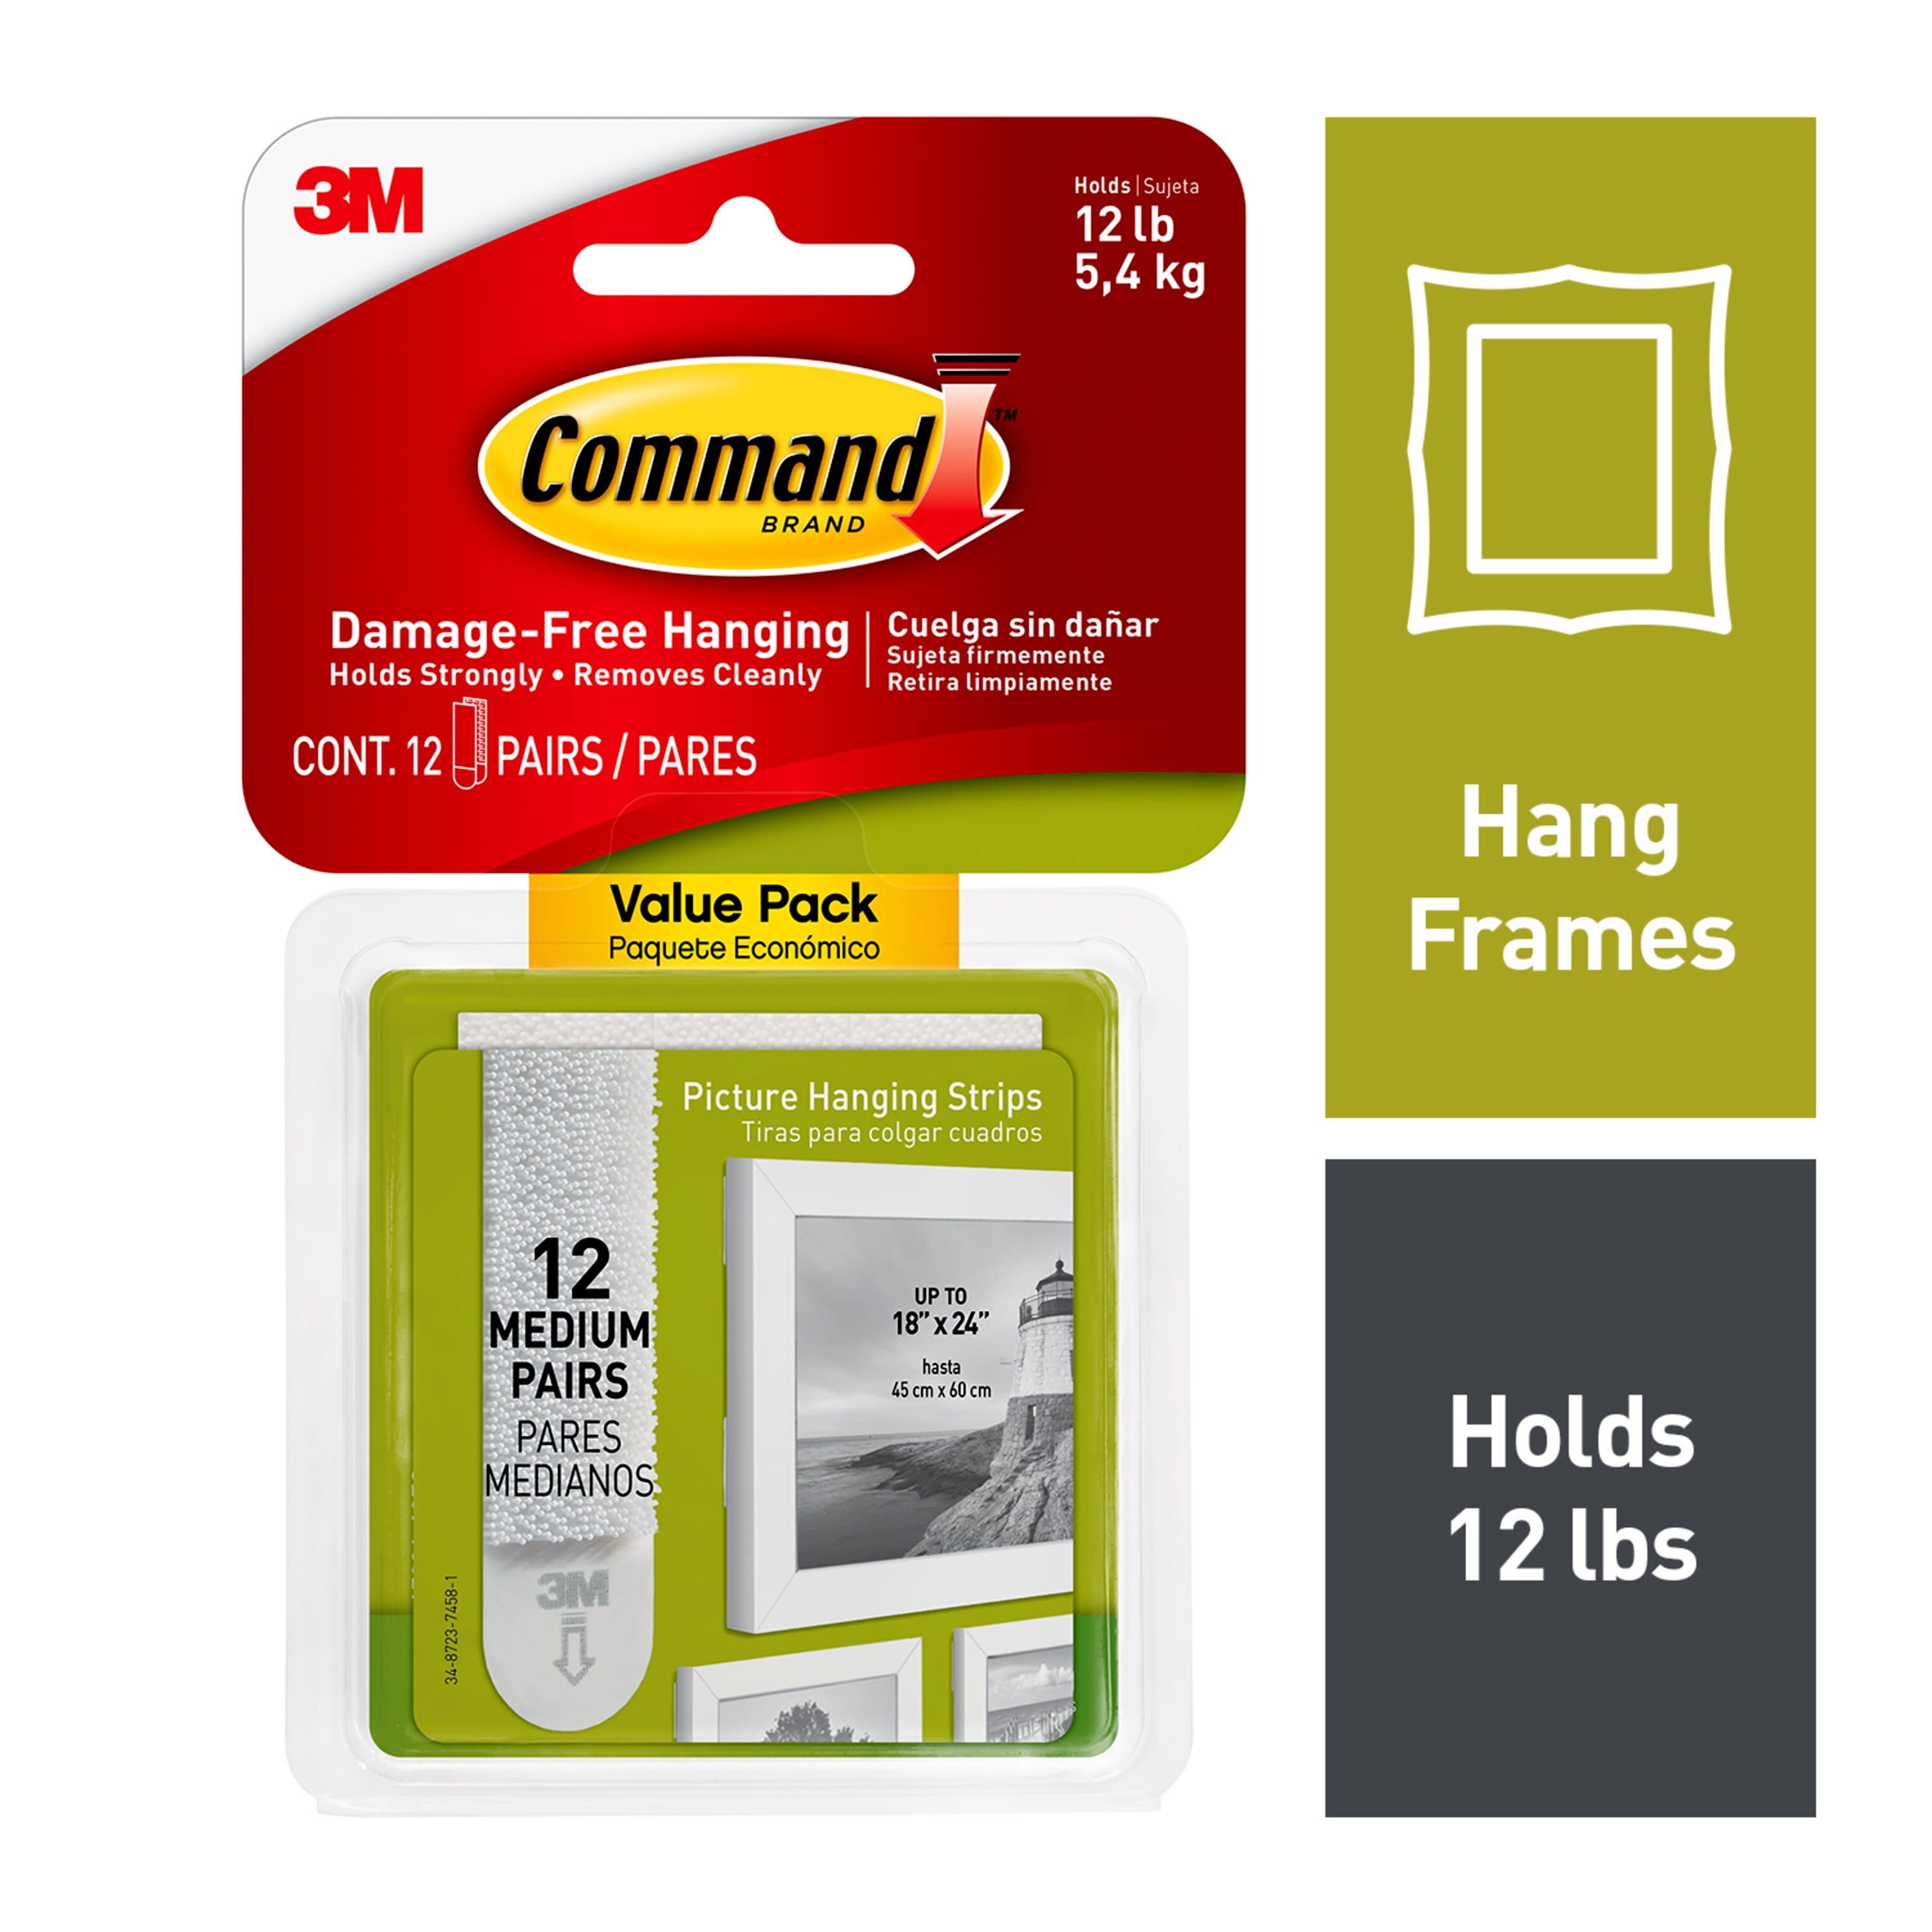 Photo Storage Pages for Four 4 x 6 Horizontal Photos, 3-Hole Punched,  10/Pack - Supply Solutions